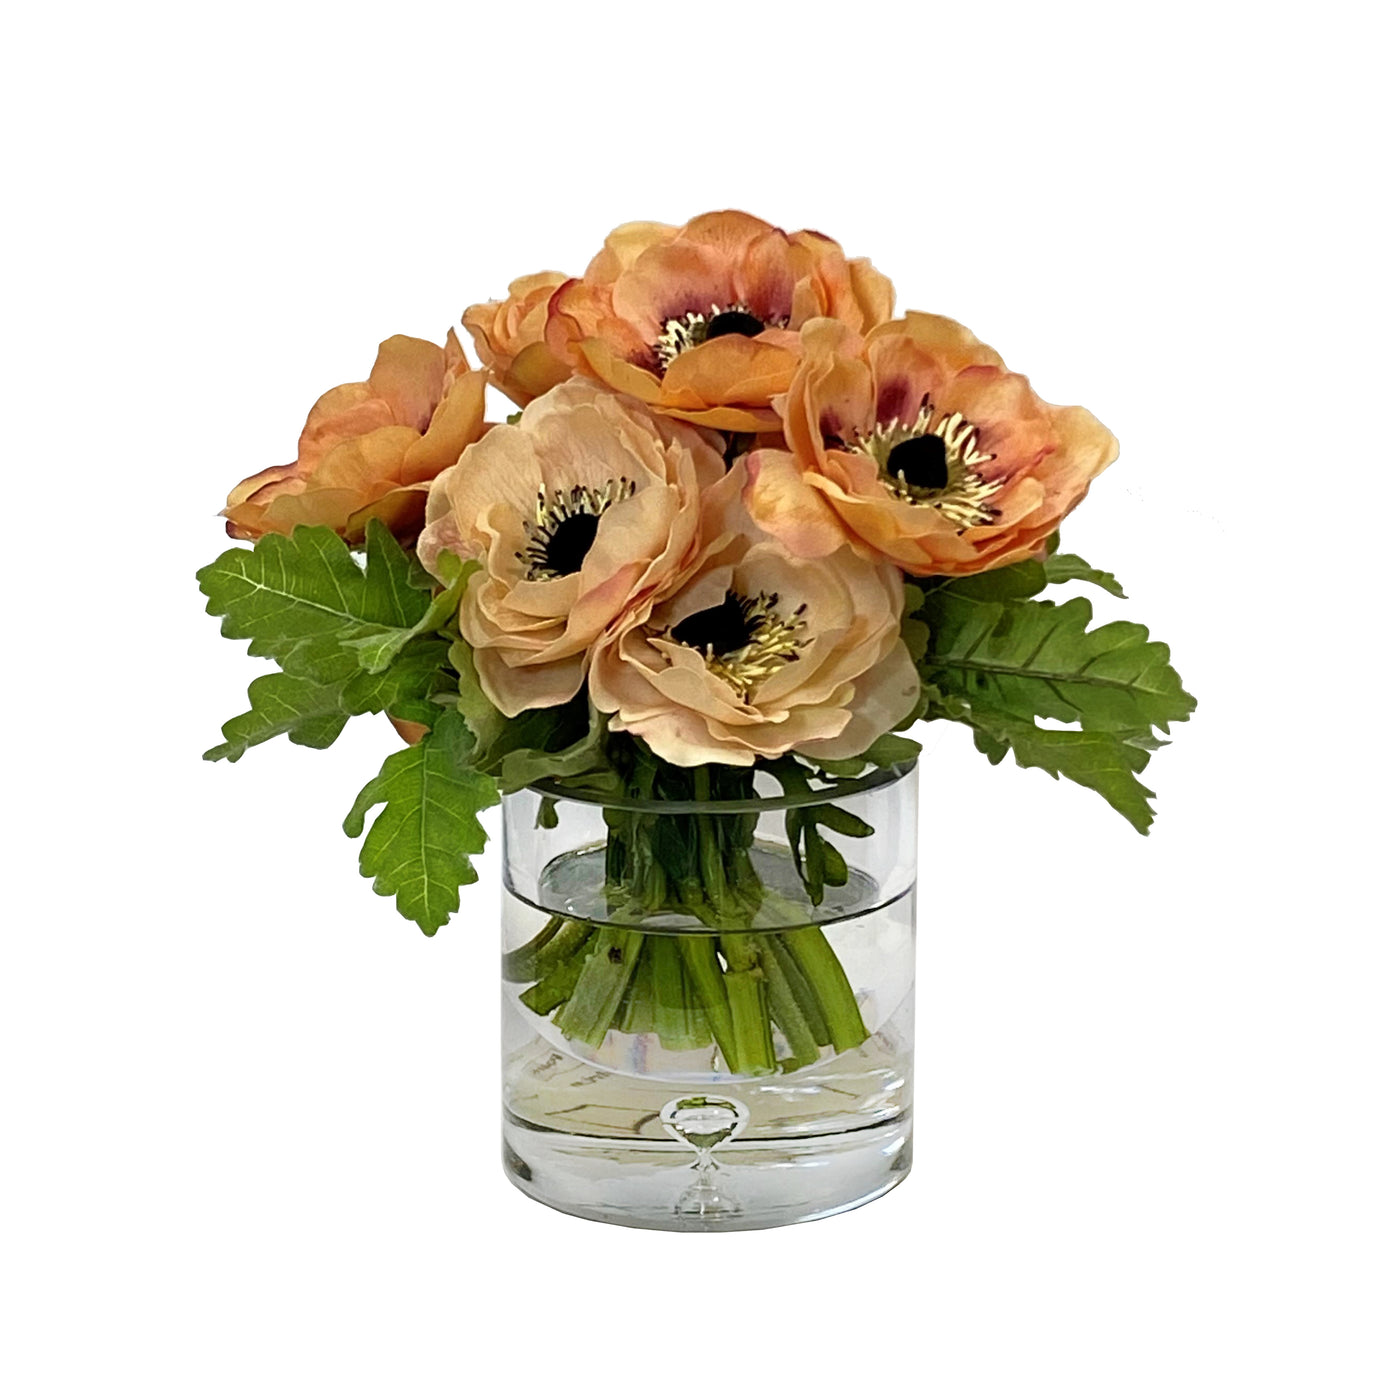 small faux flower arrangement using Real Touch faux anemones